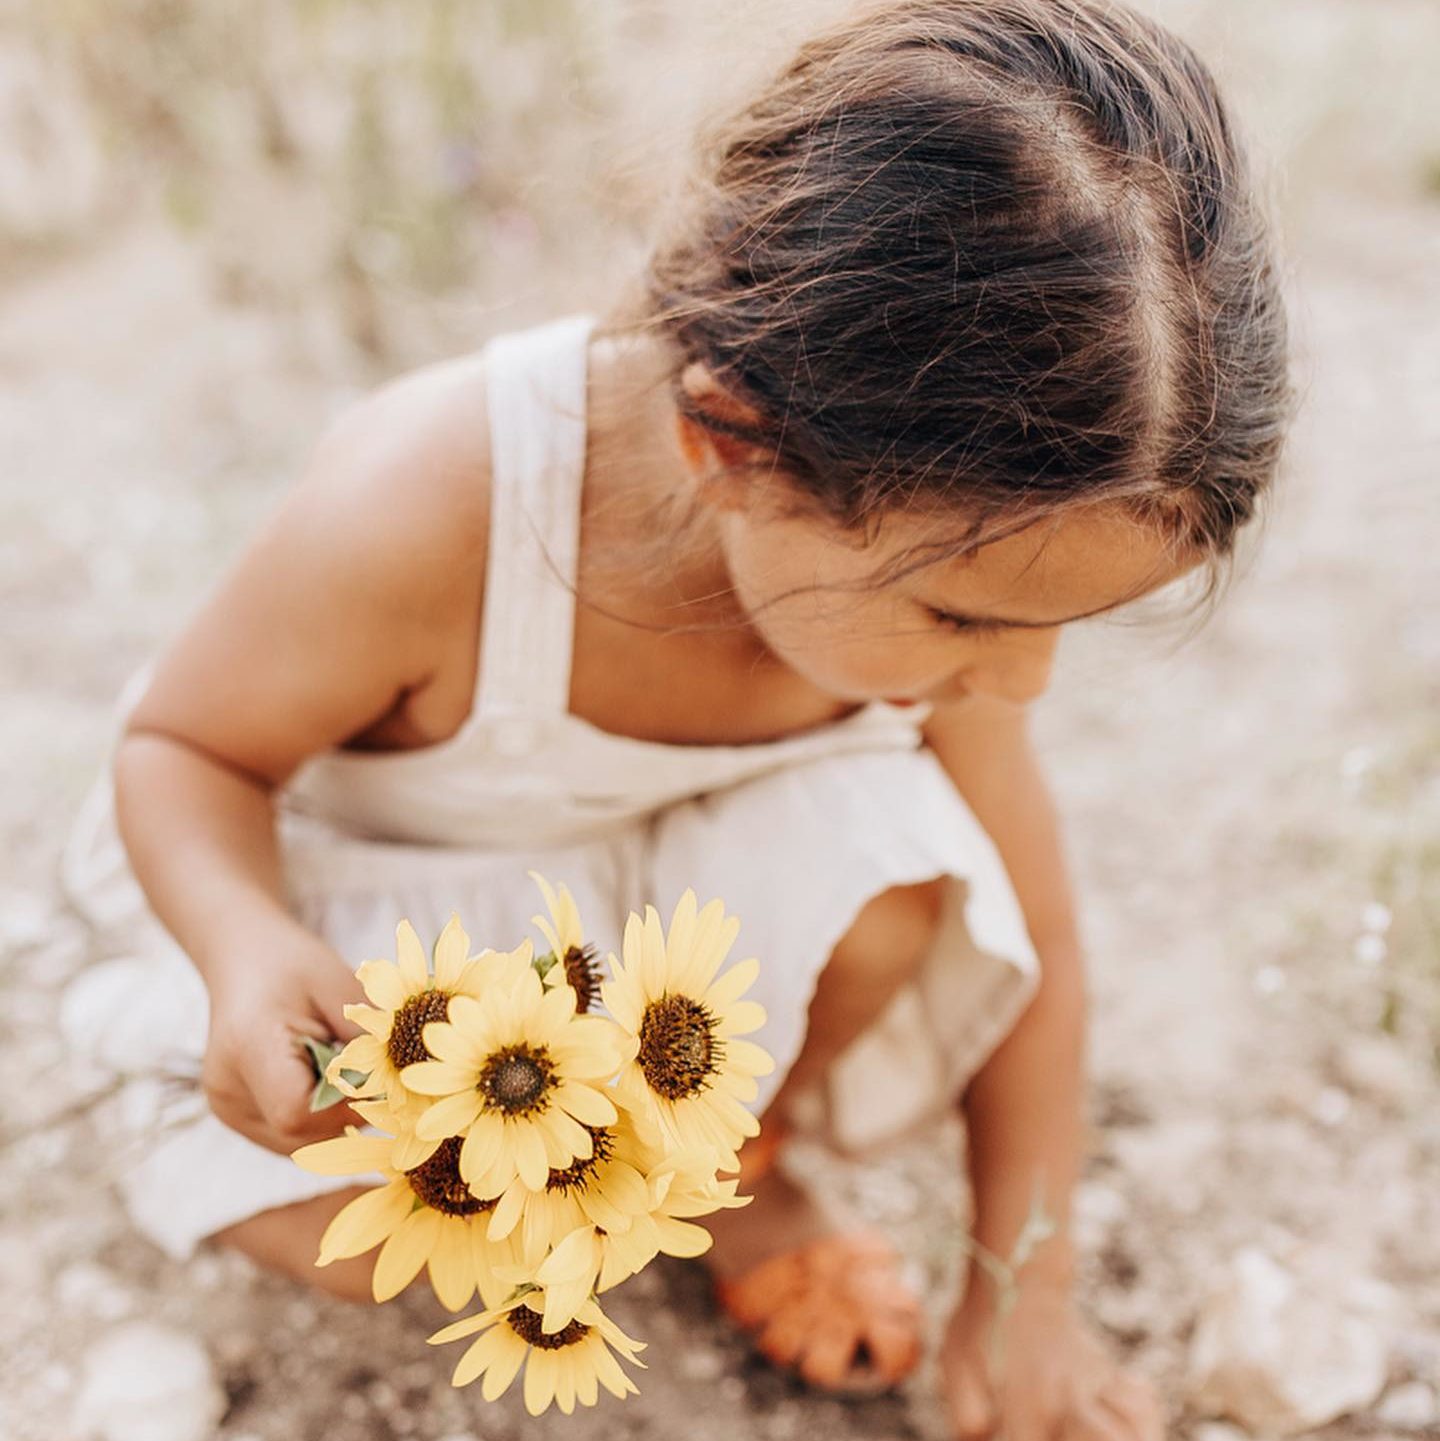 A girl picking sunflowers in a sunflower field in San Antonio during a spring mini session by local Texas photographer.